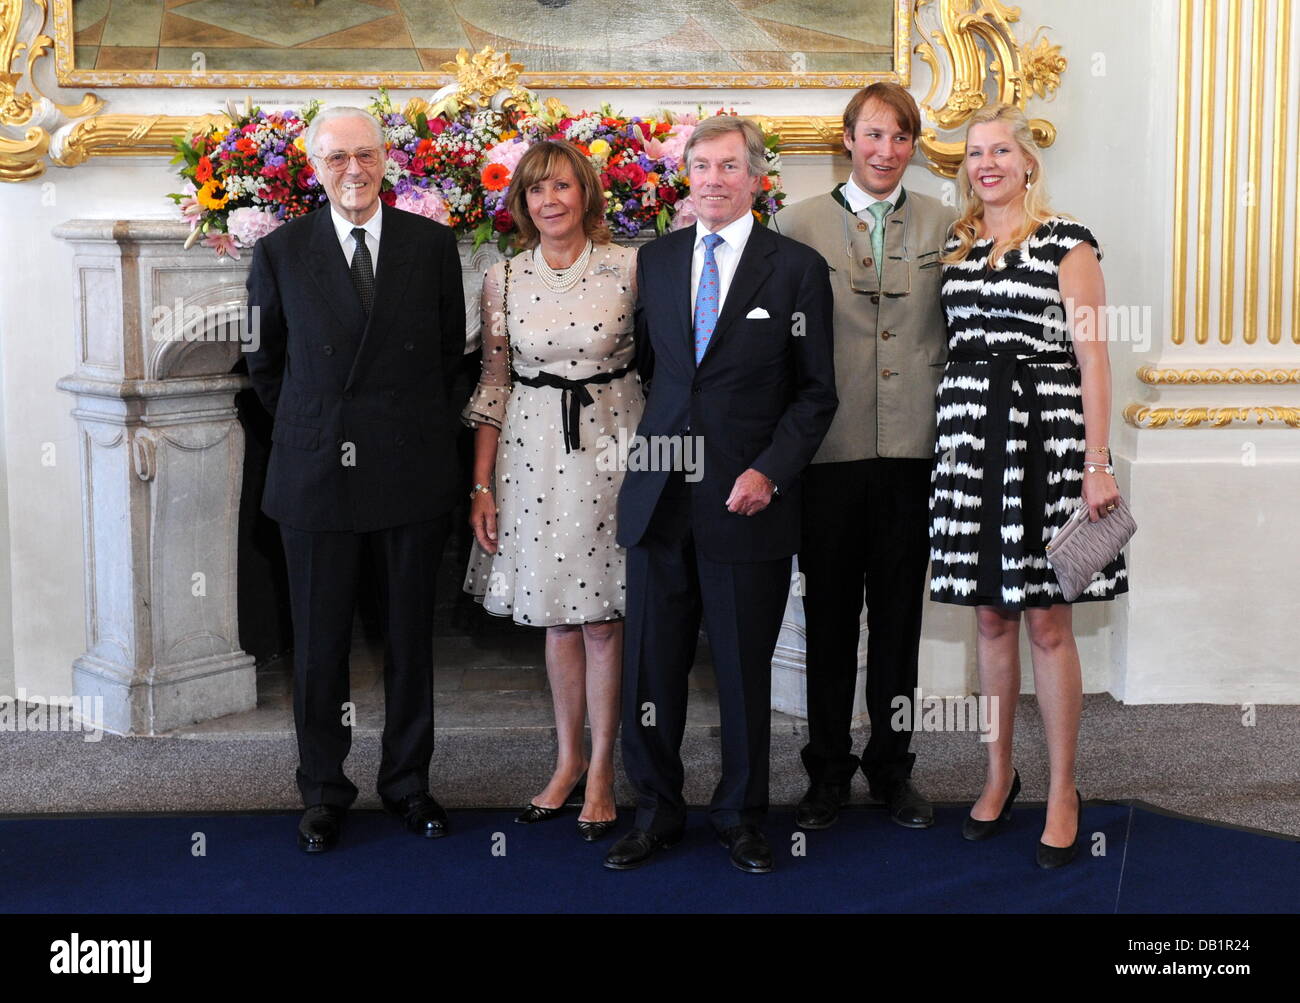 Duke Franz of Bavaria (L-R), Princess Ursula of Bavaria, Prince Leopold of Bavaria and their children Prince Konstantin and Princess Felipa pose on the occasion of the 80th birthday reception of Franz, Duke of Bavaria in Oberschleissheim, Germany, 22 July 2013. Photo: TOBIAS HASE Stock Photo